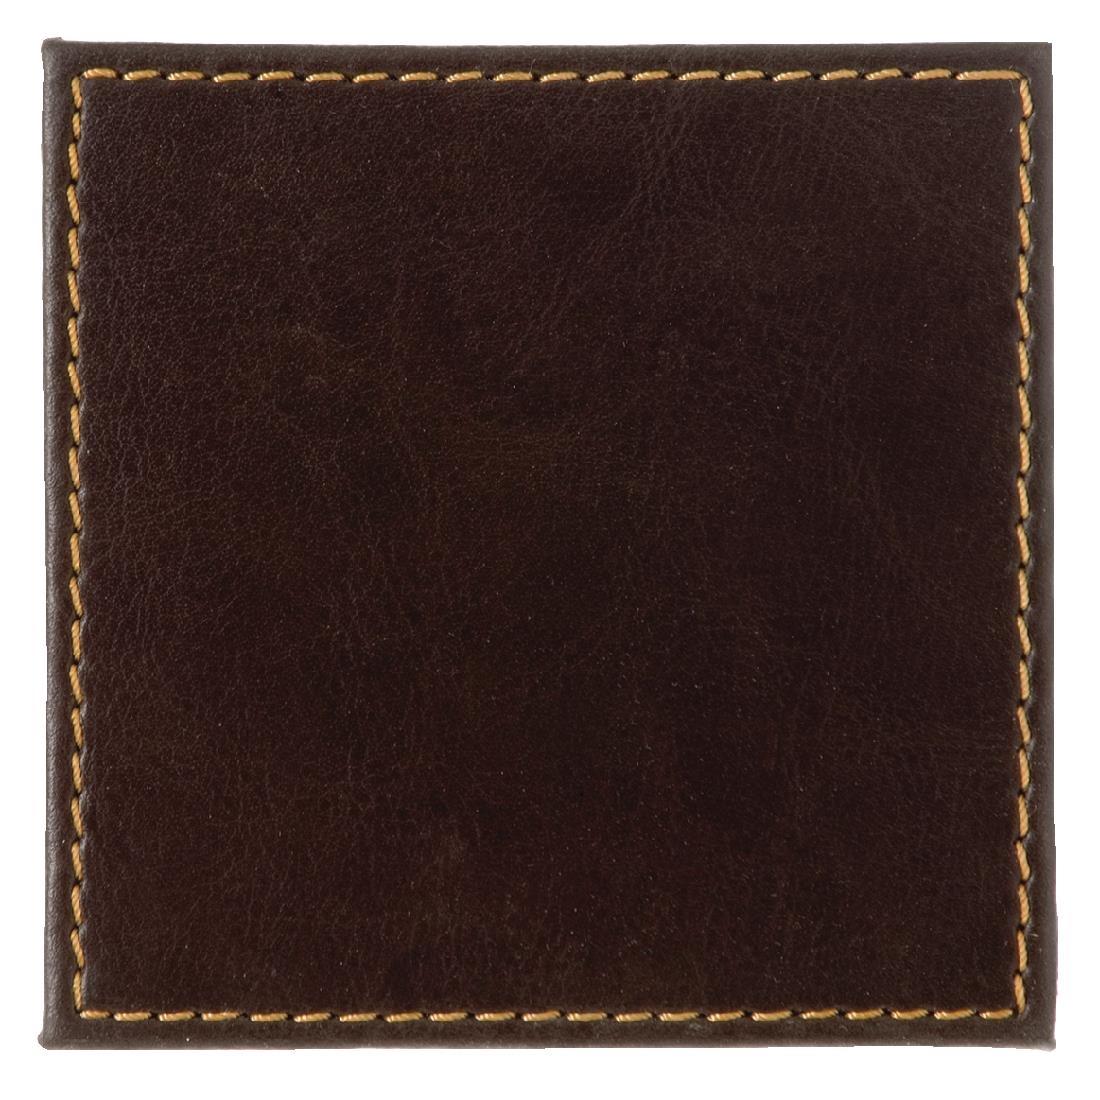 Faux Leather Coasters (Pack of 4) - CE296  - 1